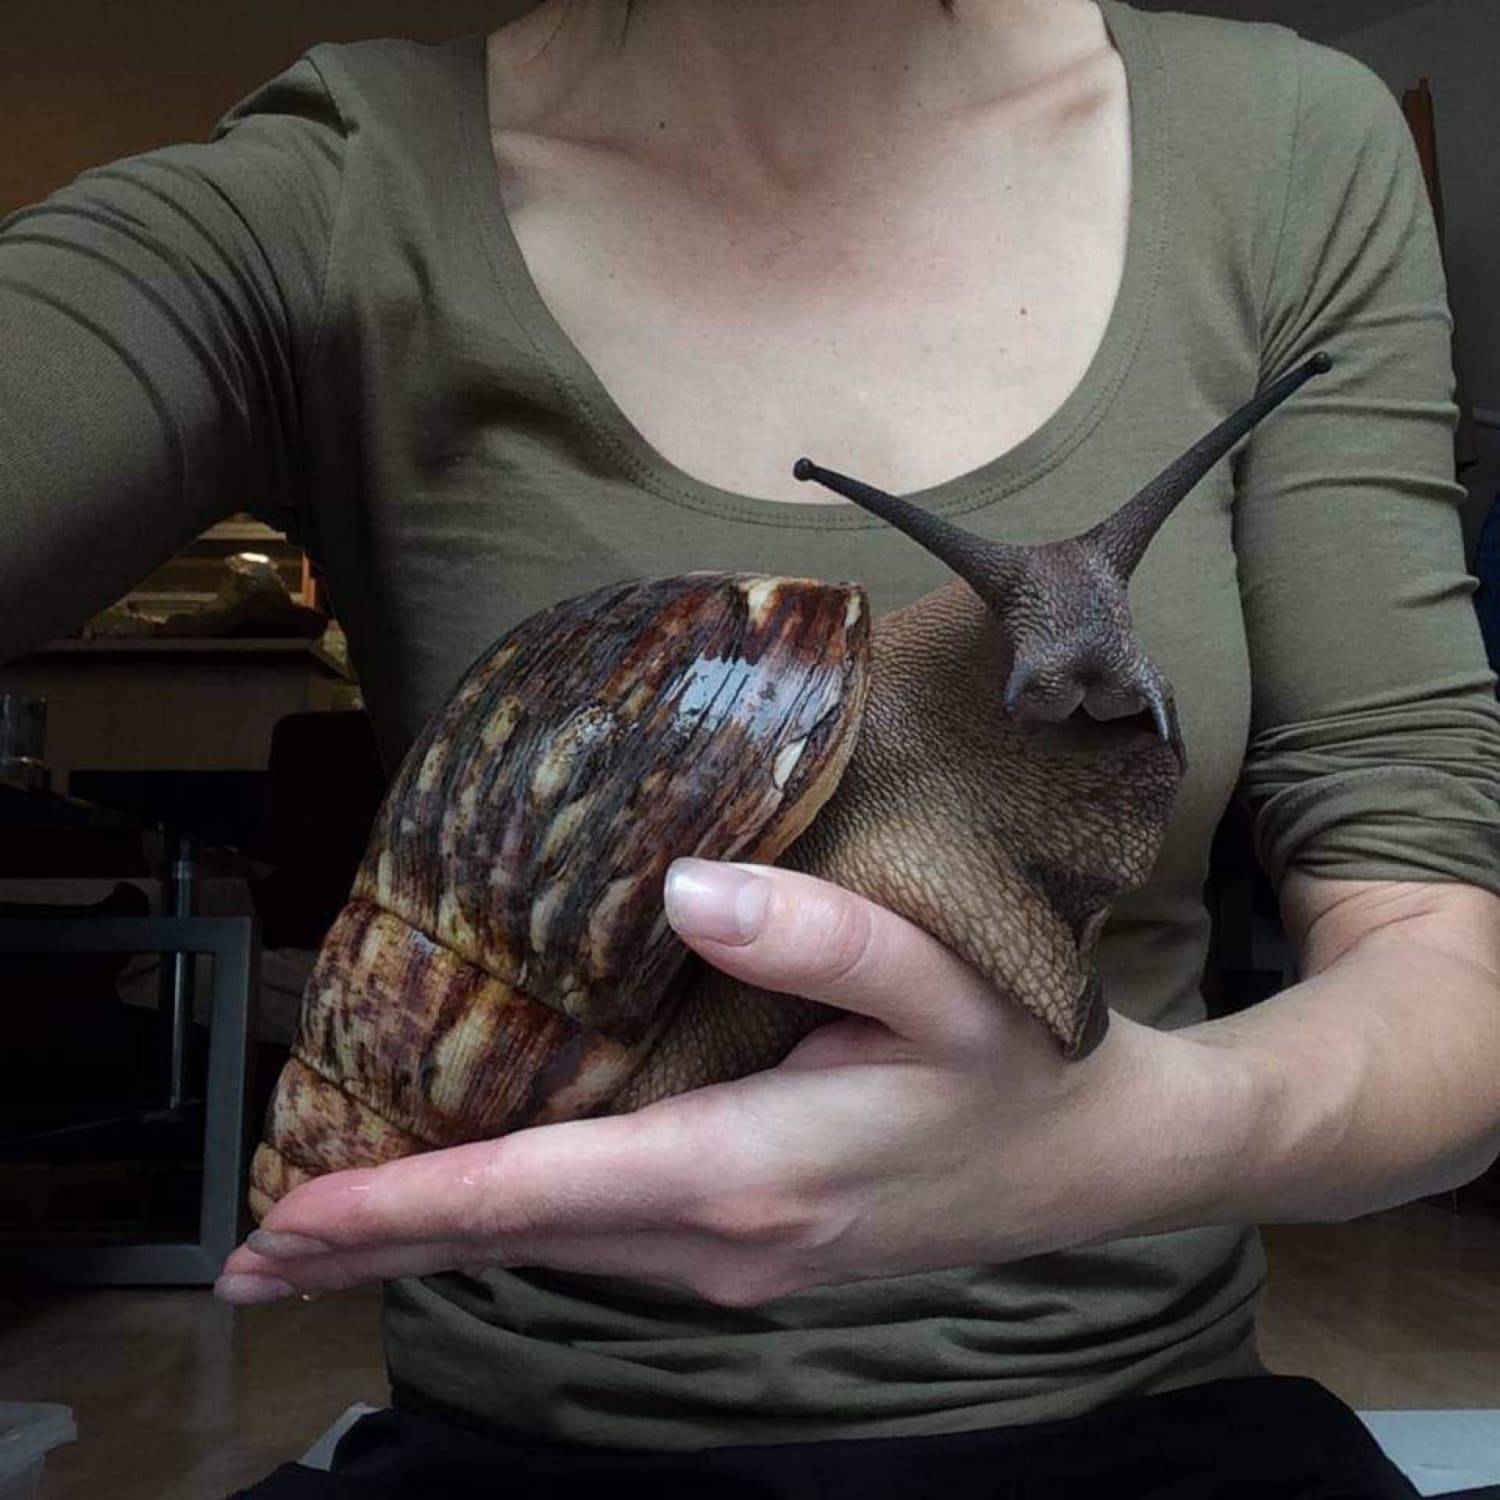 Giant African land snail 🐌